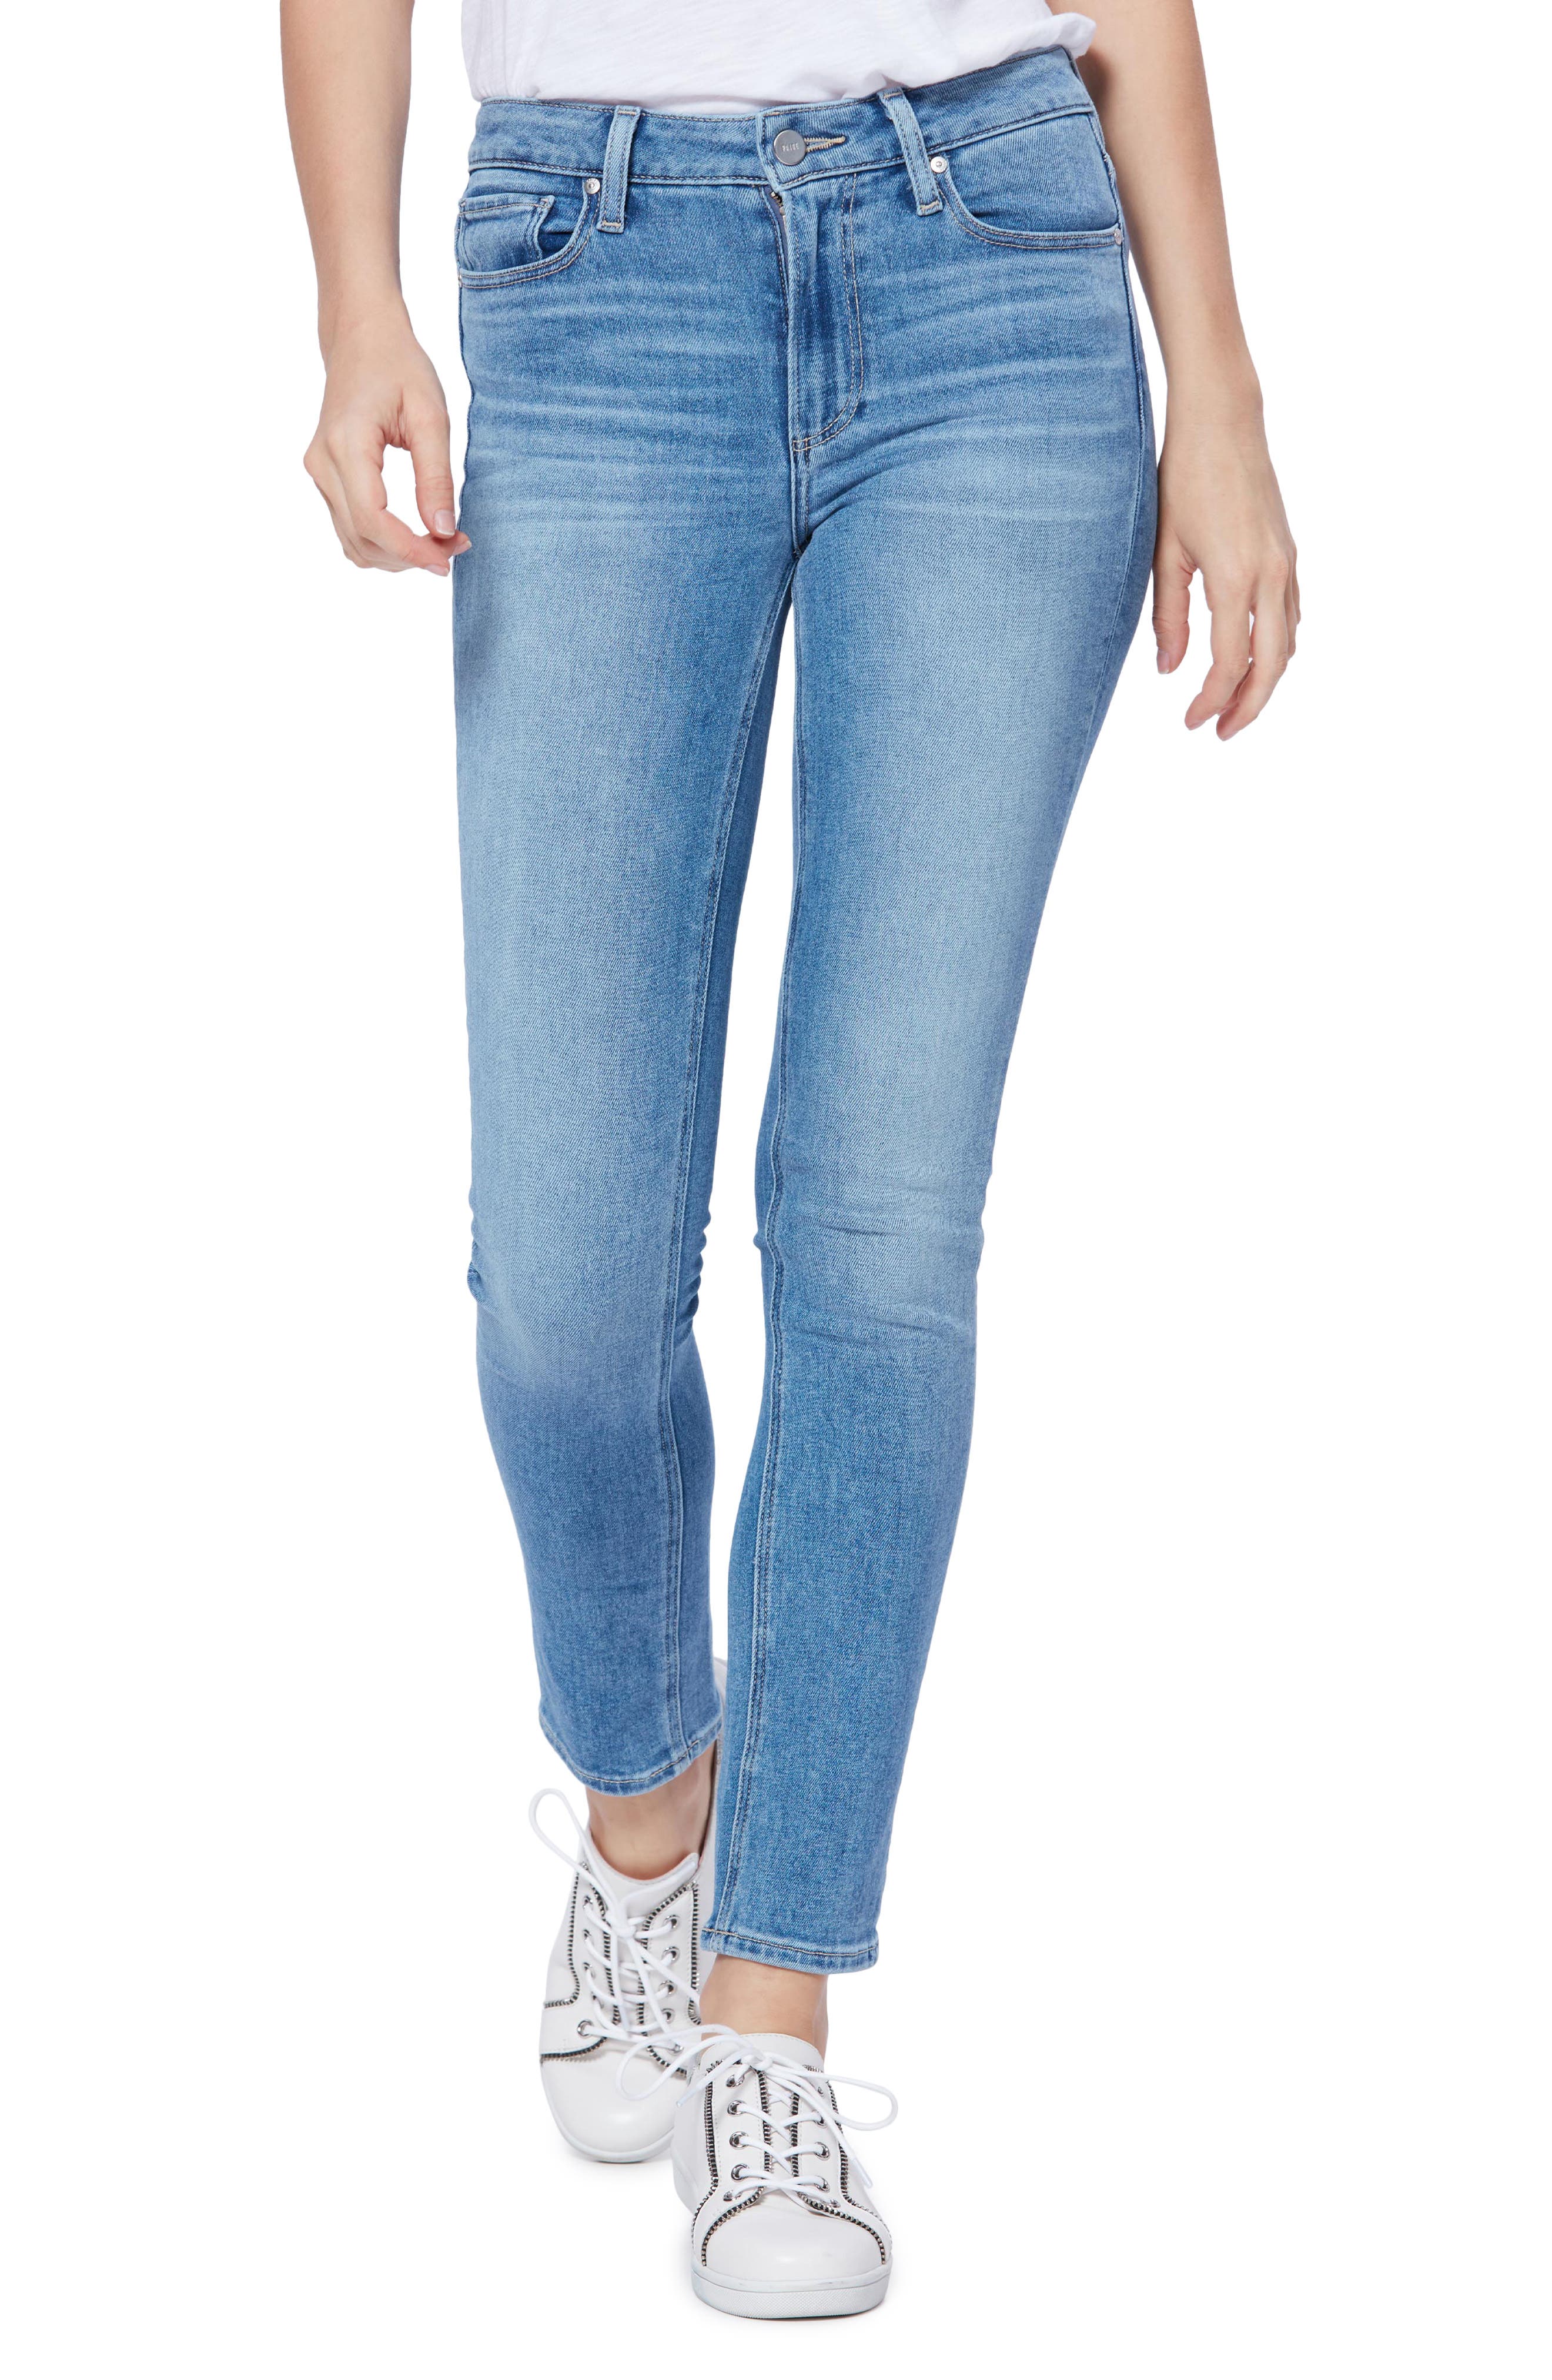 paige hoxton ankle skinny jeans